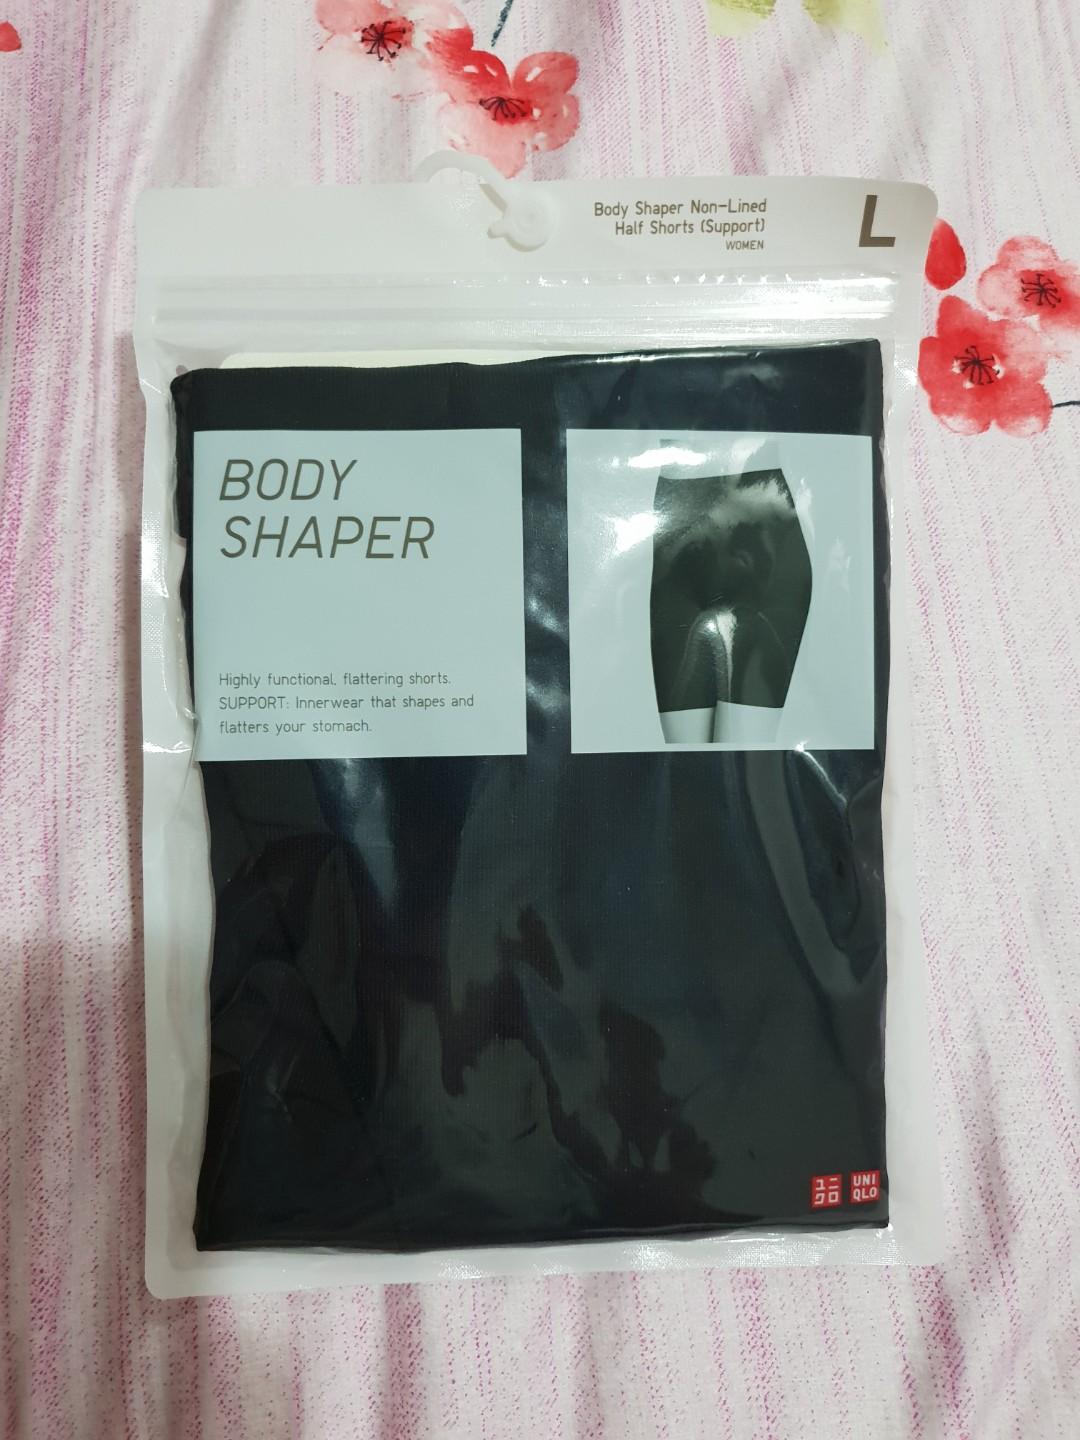 Uniqlo Body Shaper Non-Lined Half Shorts (Support) - Size L, Women's  Fashion, New Undergarments & Loungewear on Carousell